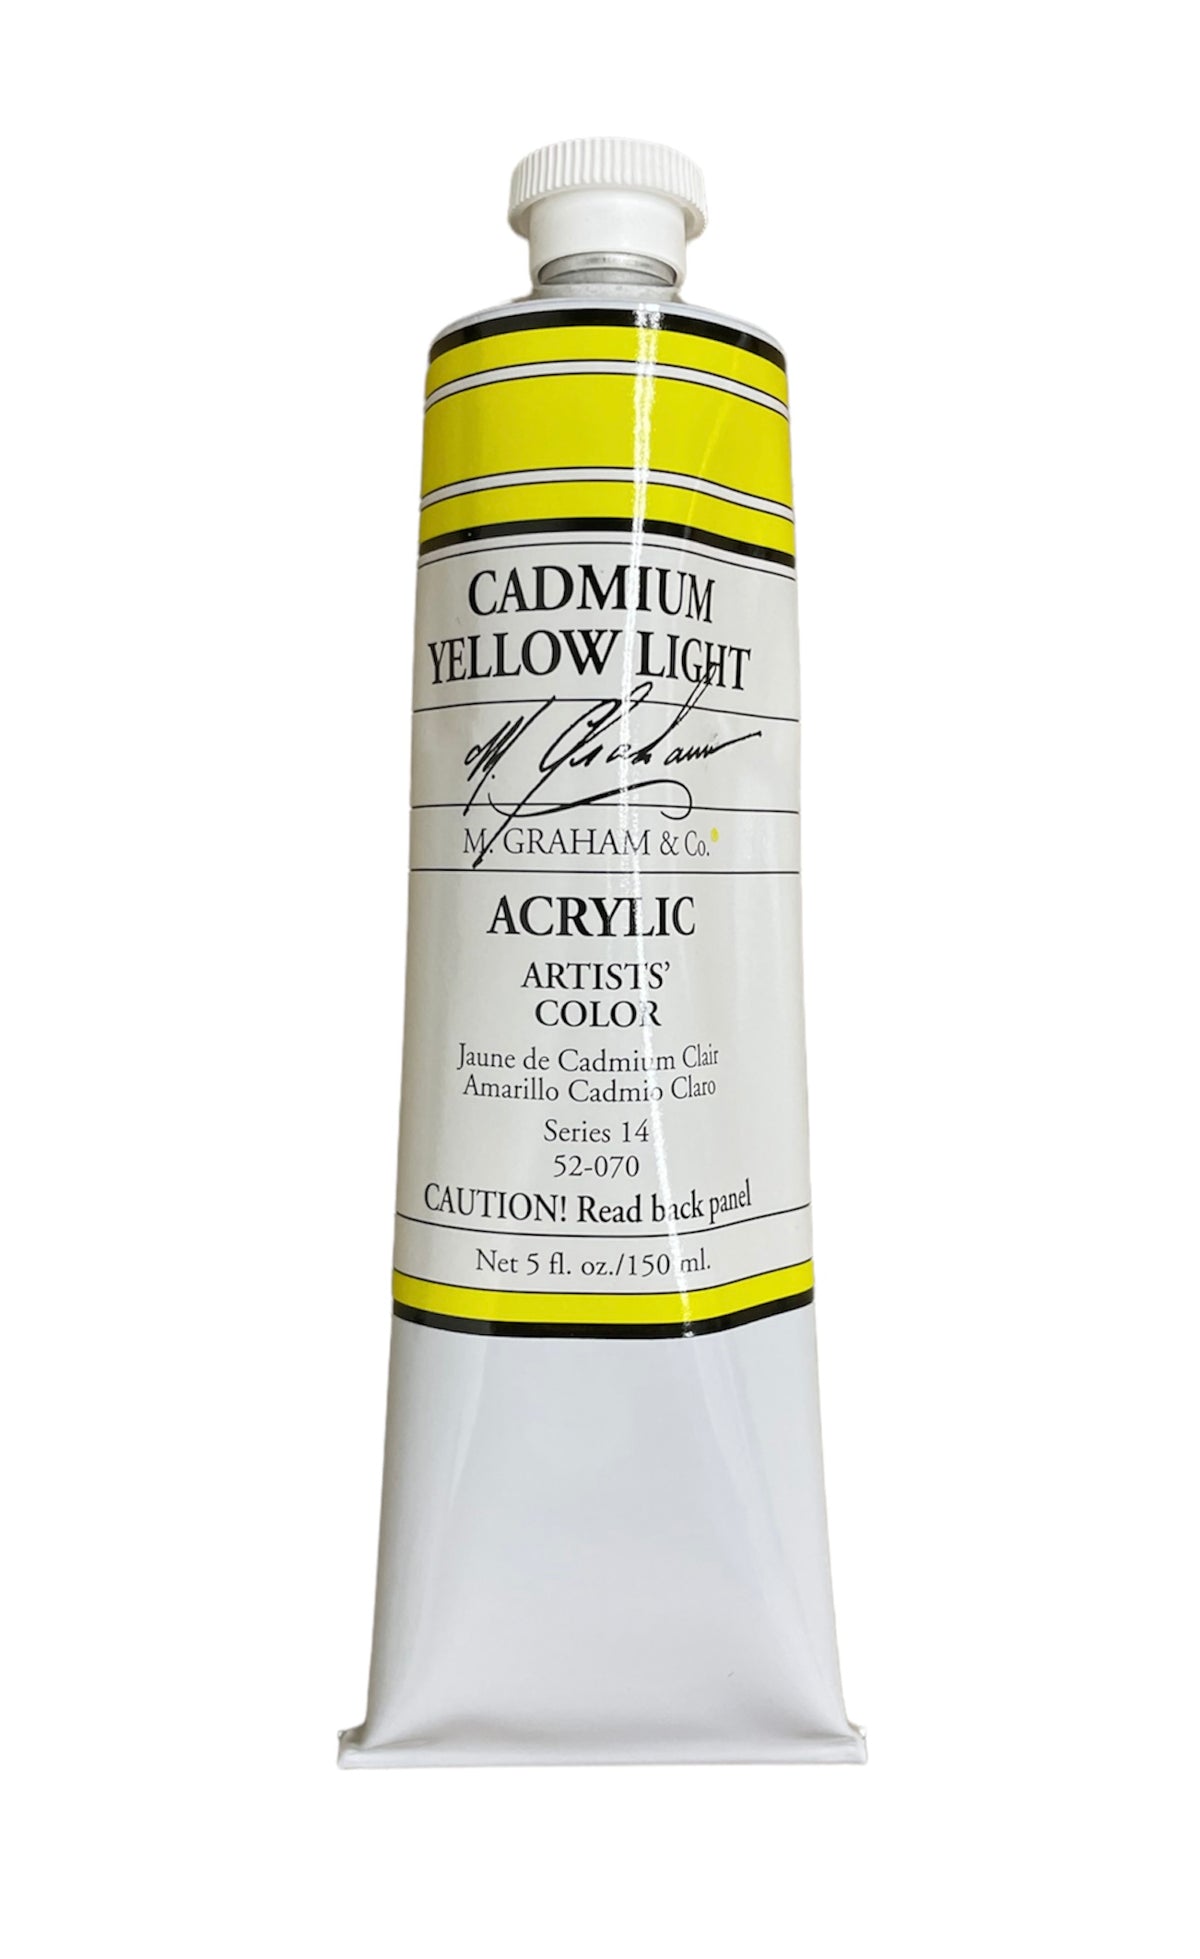 M. Graham Acrylic Cadmium Yellow Light in 150ml. Available in Drawing Etc. Art Supplies store, Singapore